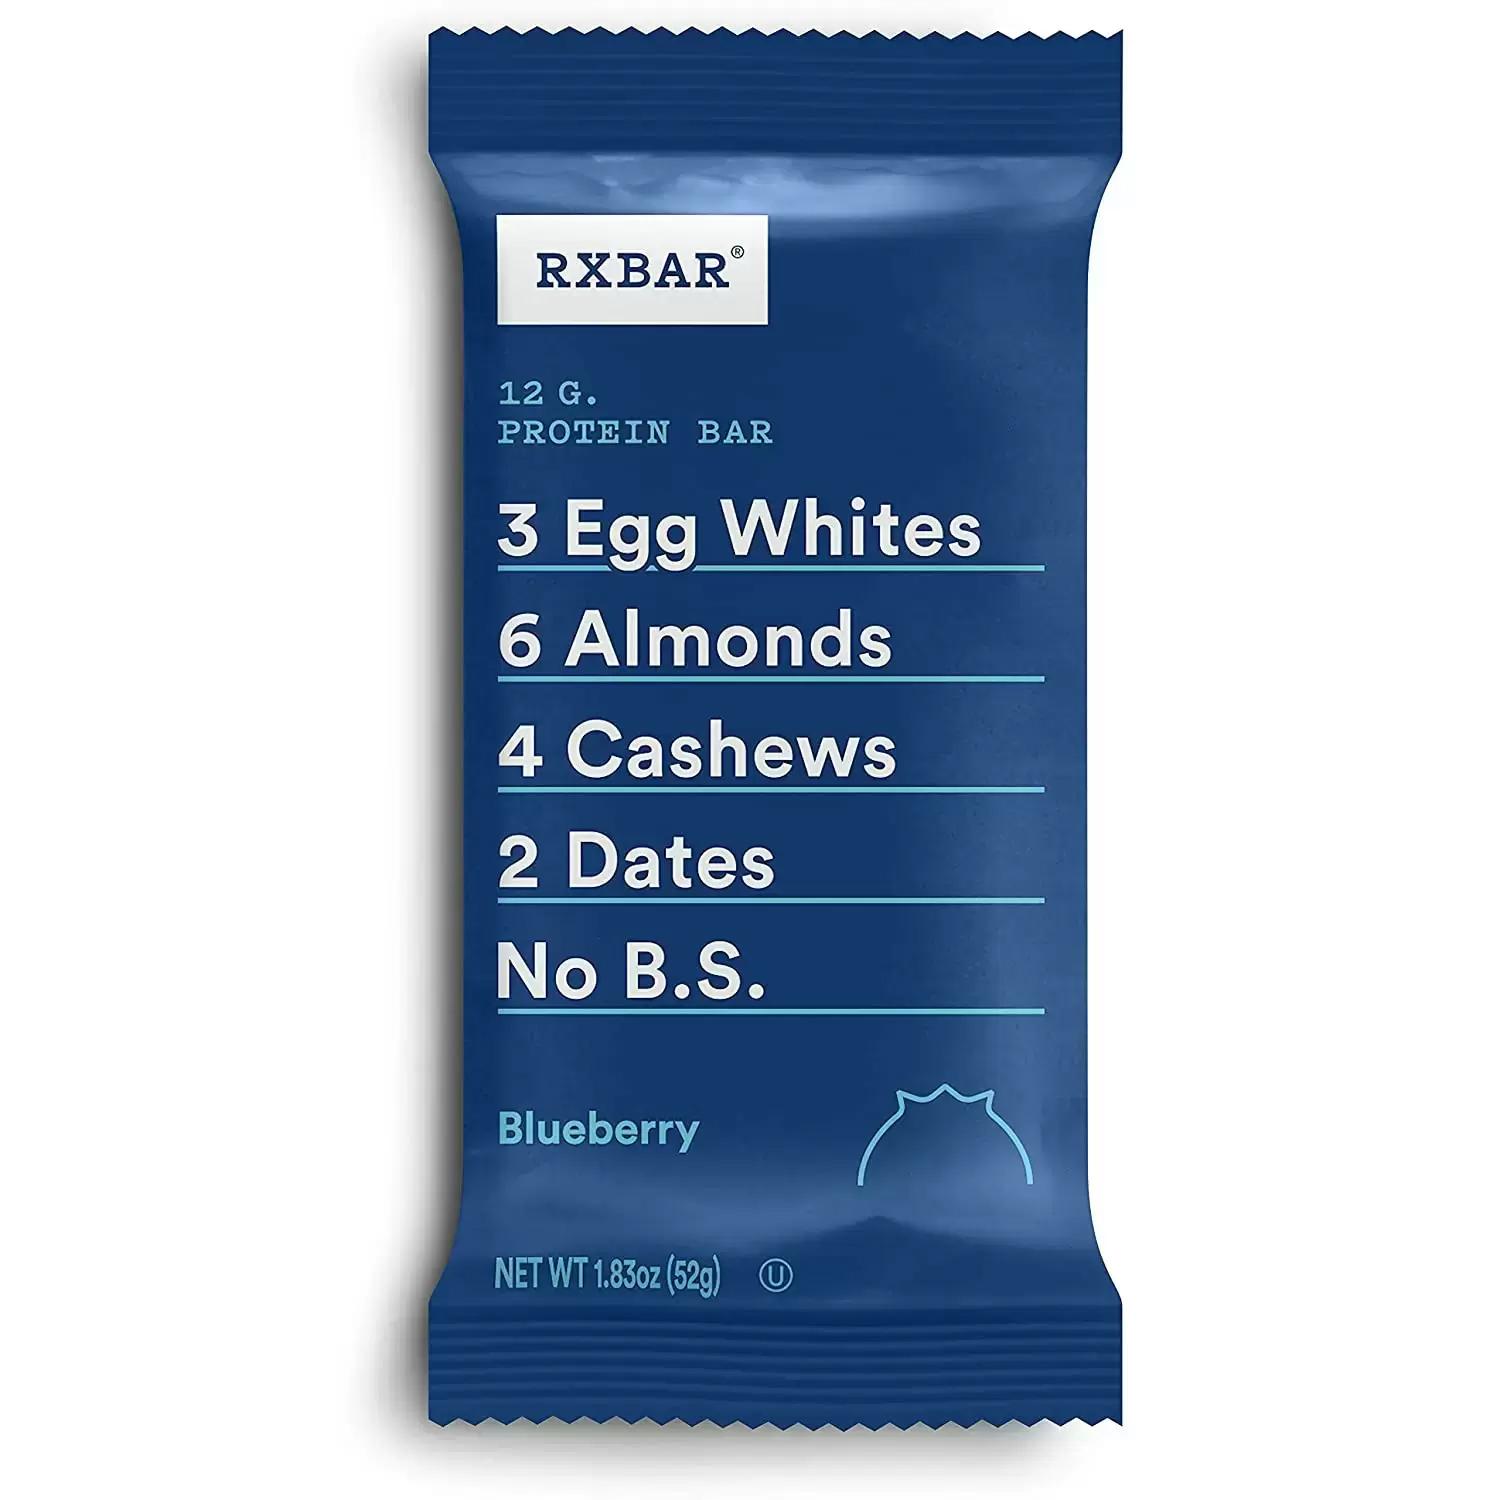 24 RXBAR Protein Bars for $25.86 Shipped